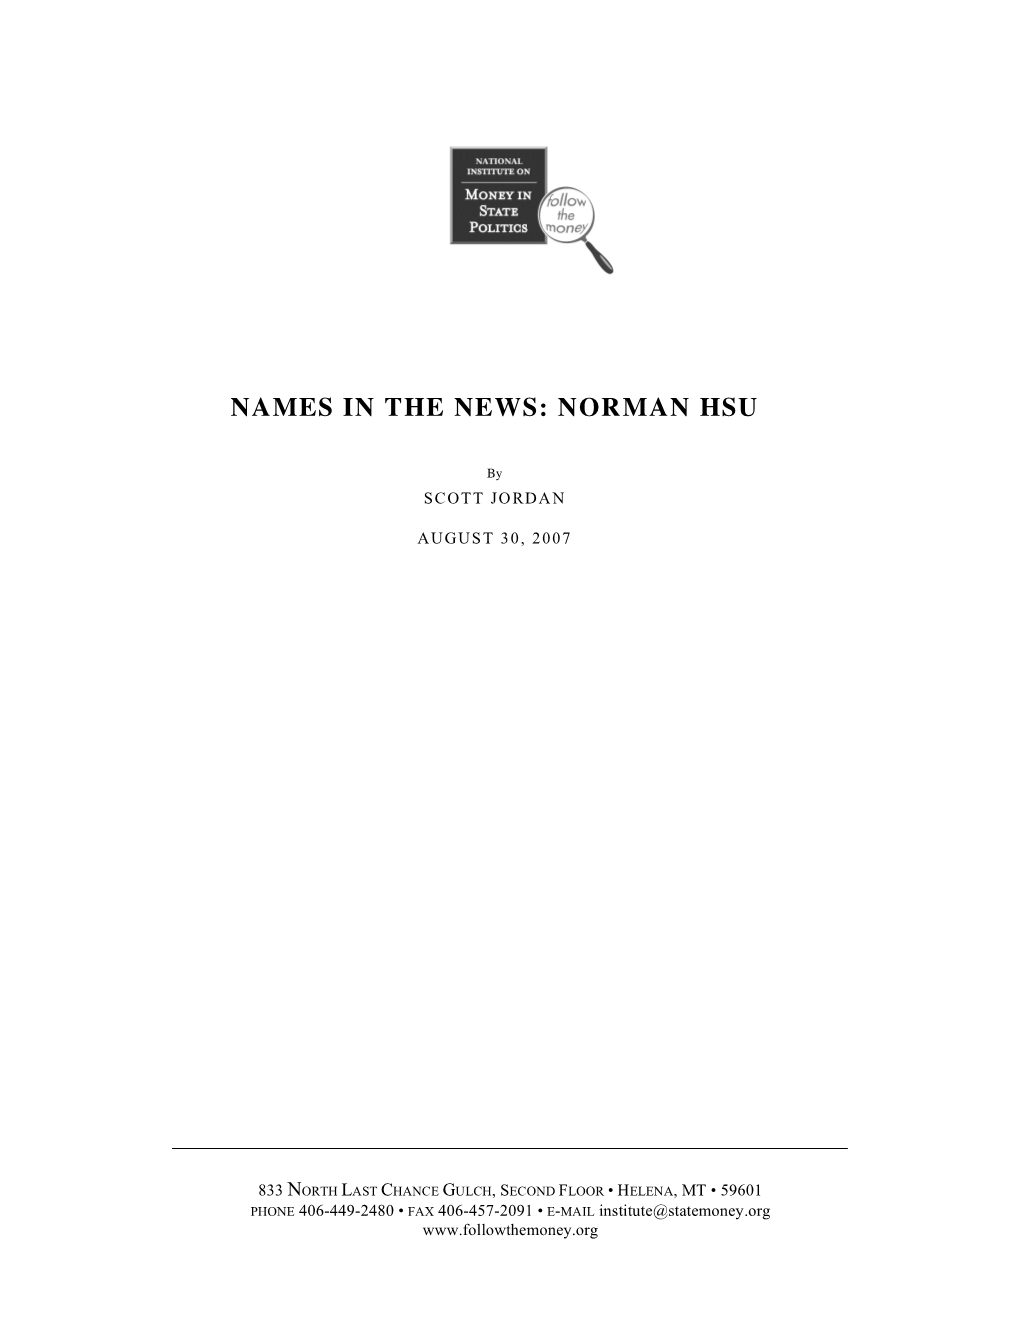 Names in the News: Norman Hsu